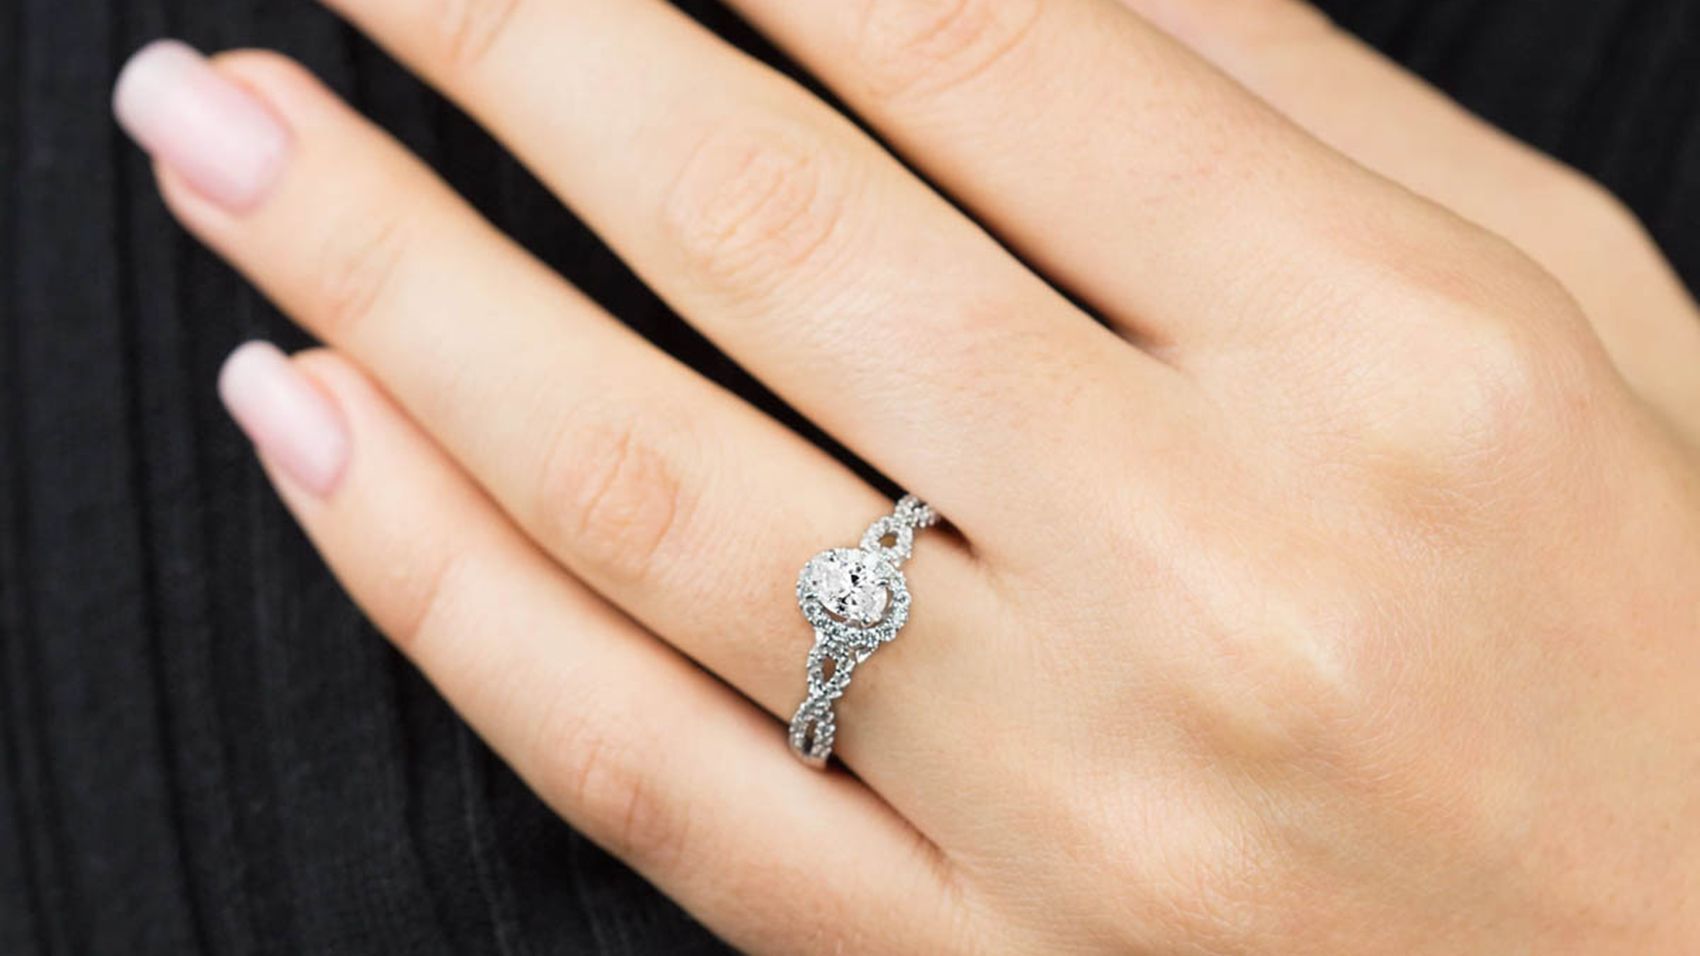 Why Moissanite Engagement Rings are Growing in Popularity